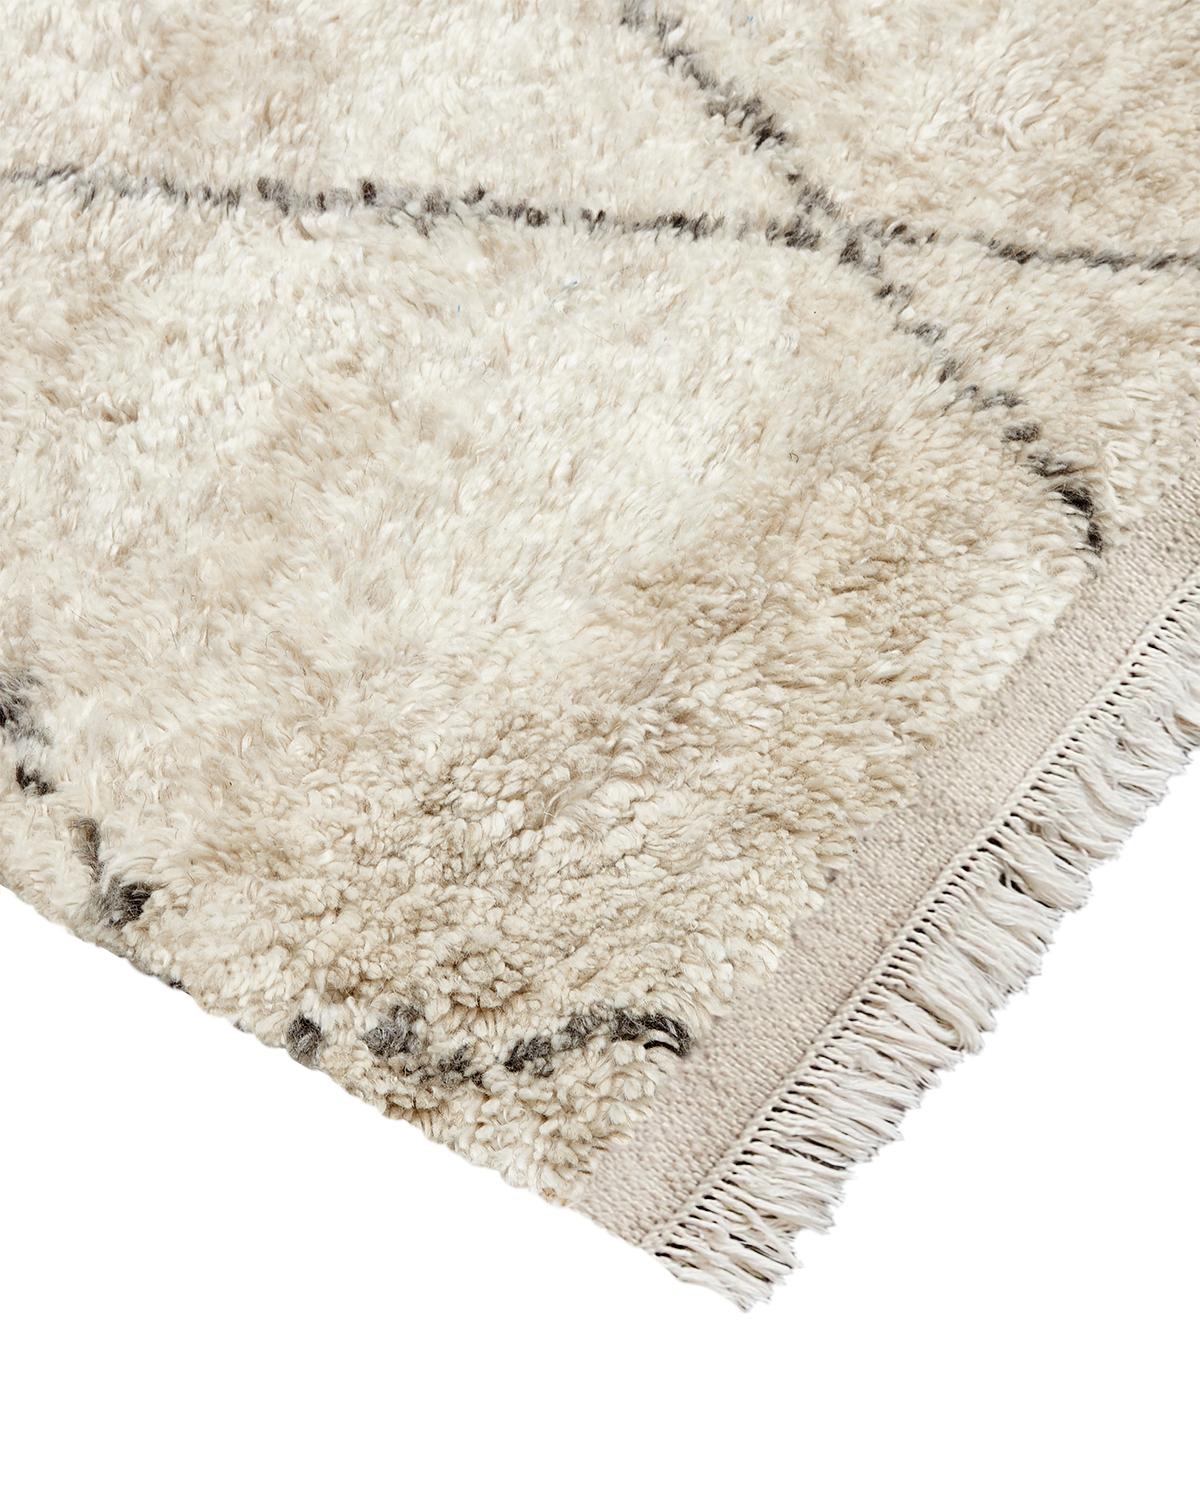 Moroccan rugs such as Beni Ourains and boucherouites are highly prized for their plush pile that makes walking barefoot a delight. Hand-knotted of sumptuous wool with designs inspired by centuries-old tribal motifs, the Shaggy Moroccan collection